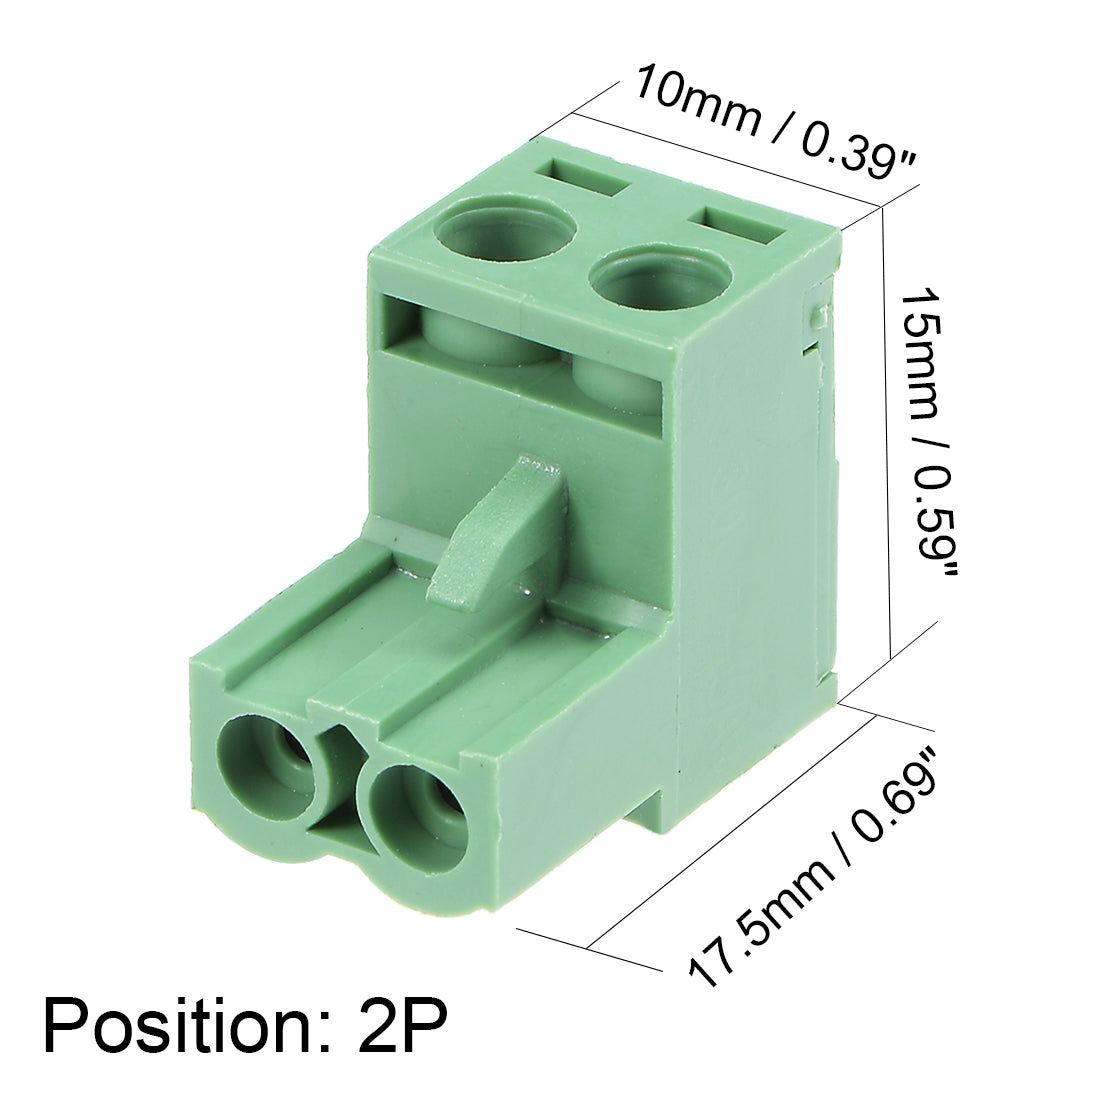 uxcell Uxcell 20Pcs AC300V 15A 5.08mm Pitch 2P Flat Angle Needle Seat Insert-In PCB Terminal Block Connector green